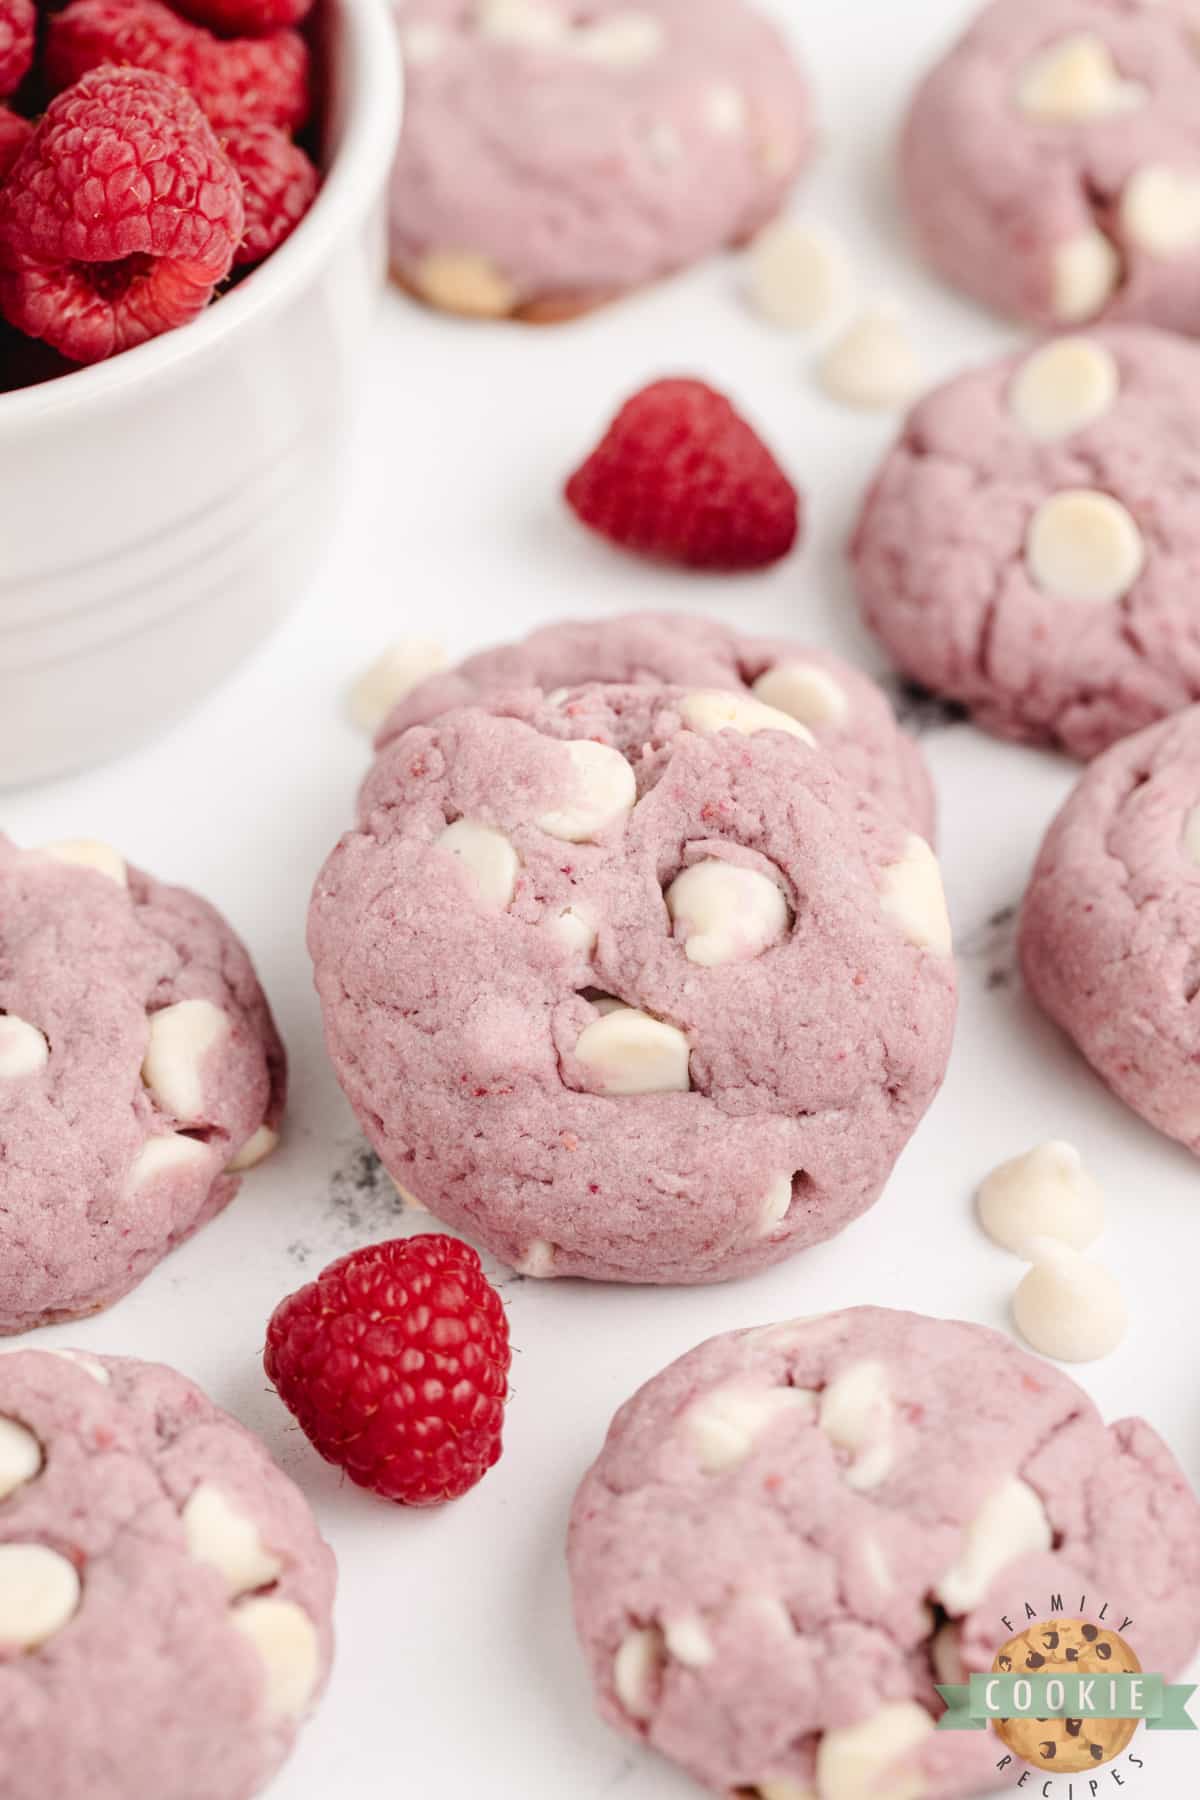 Raspberry Cookies made with frozen raspberries and white chocolate chips. Simple raspberry cookie recipe yields soft and chewy cookies that are perfectly pink! 